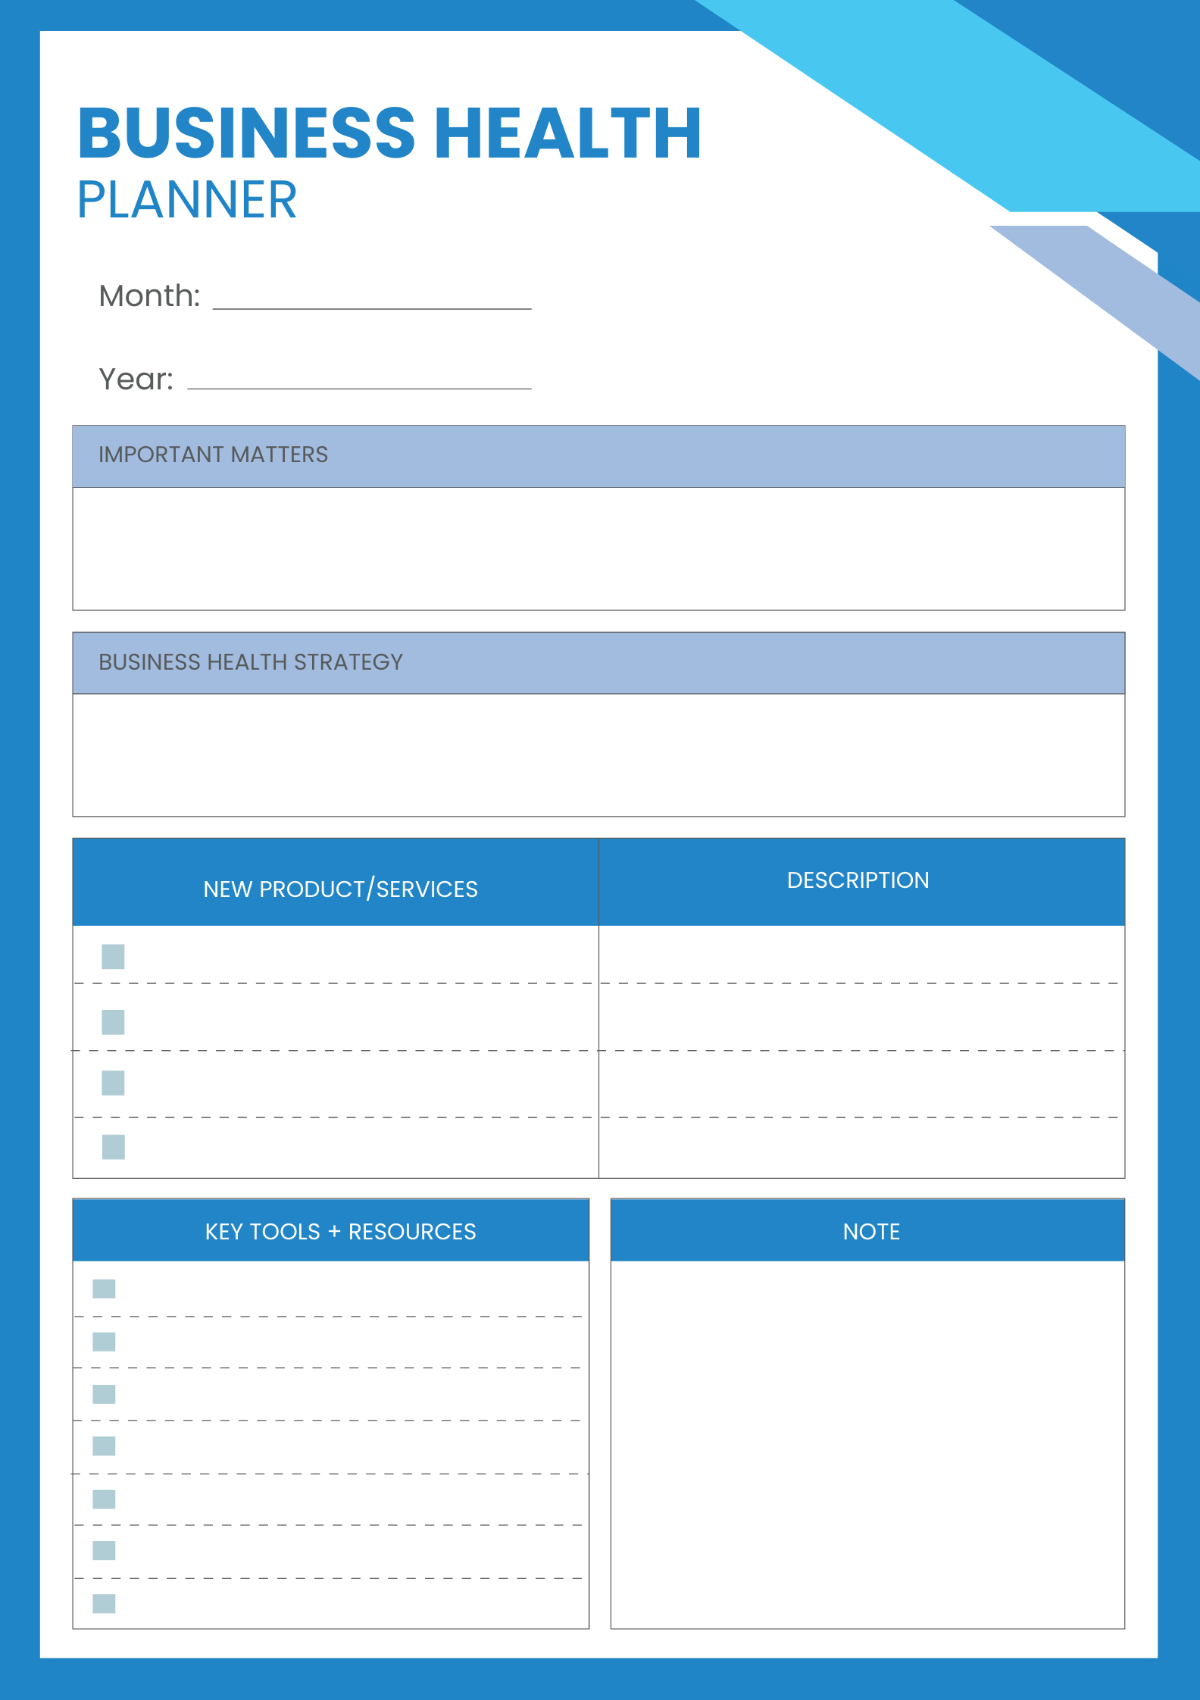 Business Health Planner Template